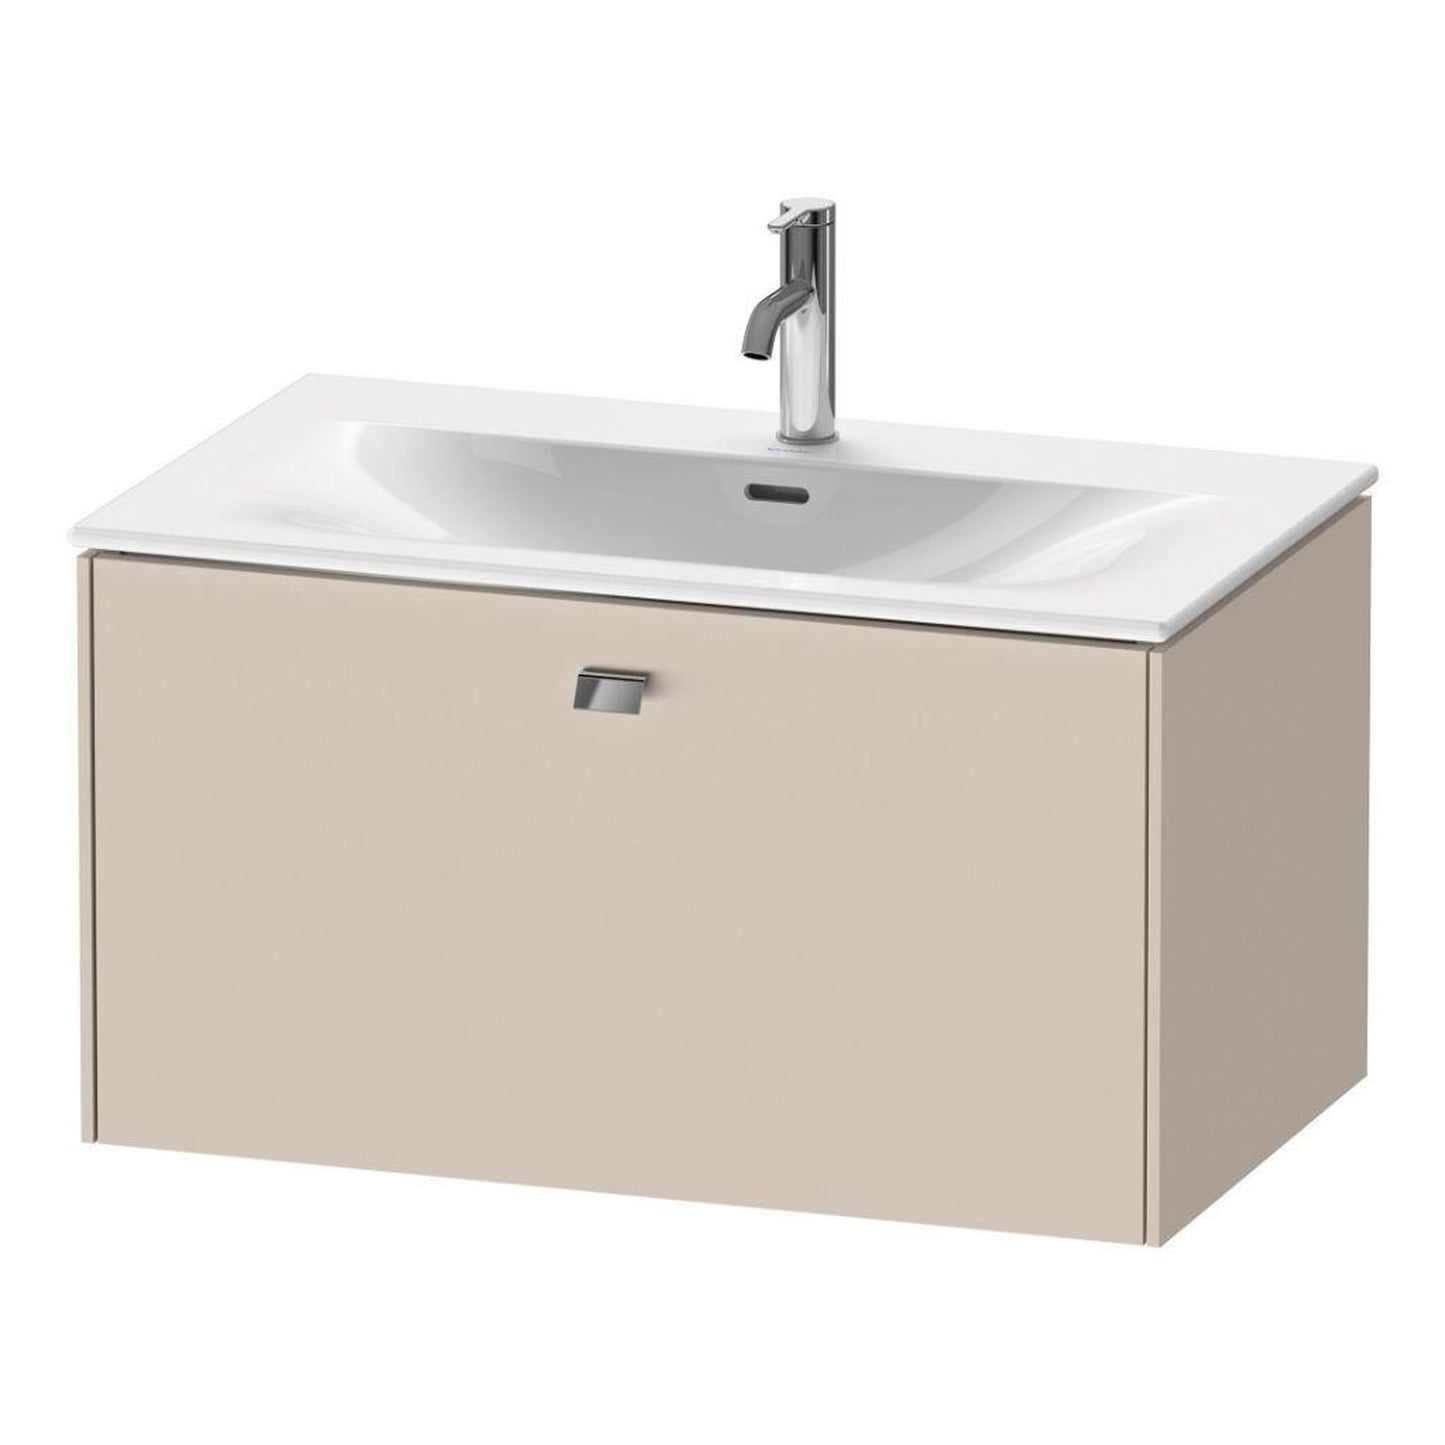 Duravit Brioso BR42120 32" x 17" x 19" One Drawer Wall-Mount Vanity Unit in Taupe and Chrome Handle